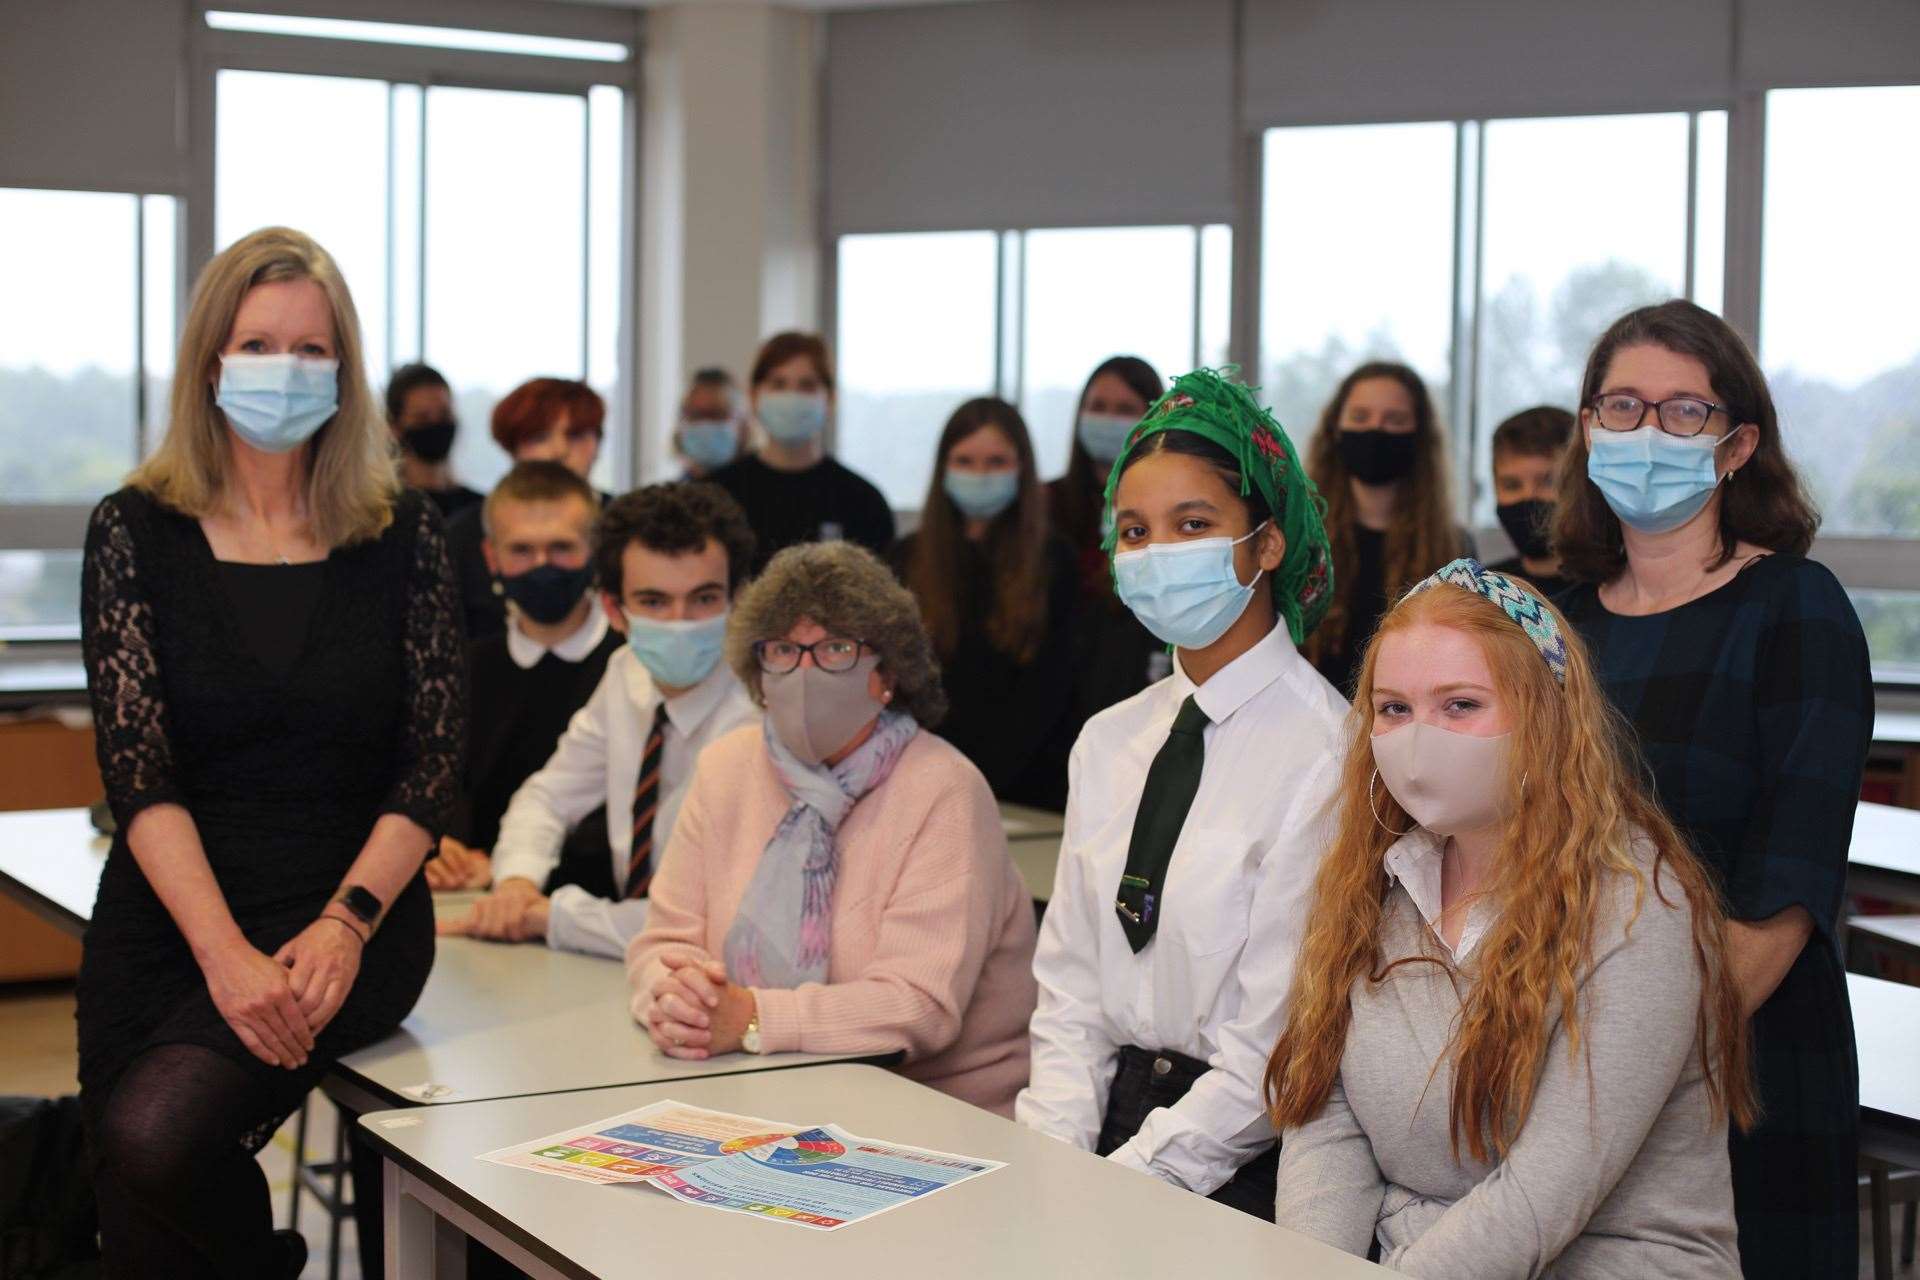 Carbon cutting at Kemnay saw head teacher Lizbeth Paul (left) and pupils welcome councillors Gillian Owen and Rosemary Bruce to the school.